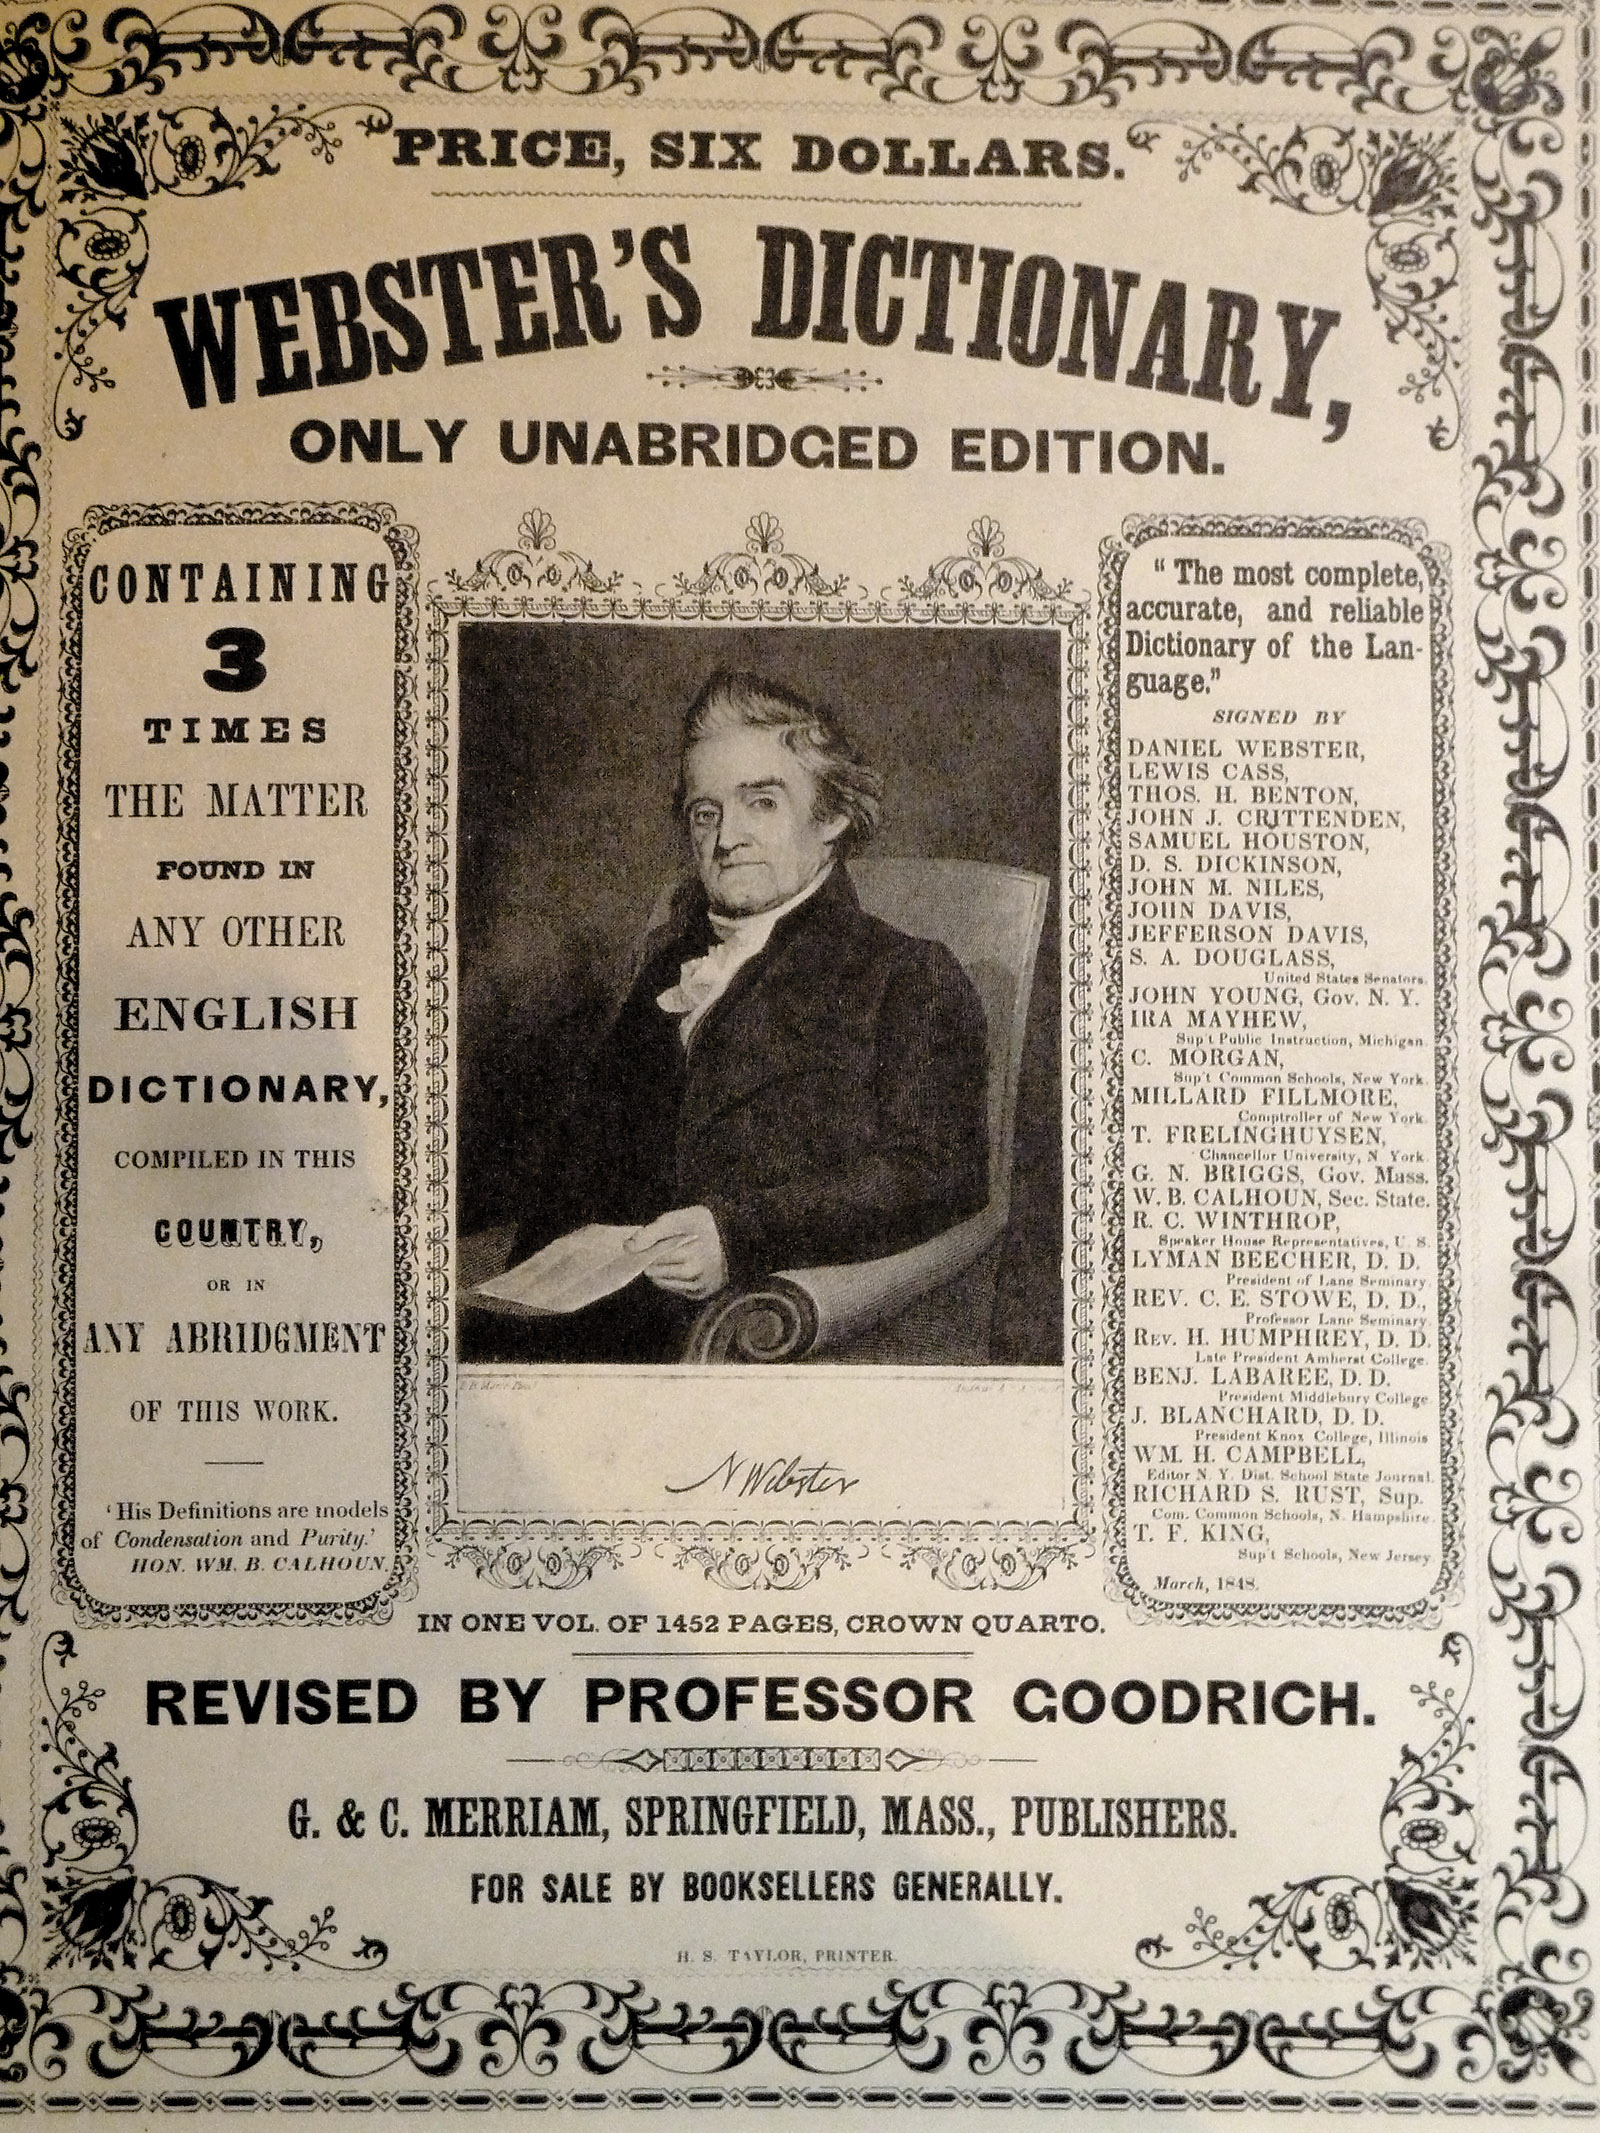 Noah Webster in an advertisement for Webster’s dictionary, 1847–1848